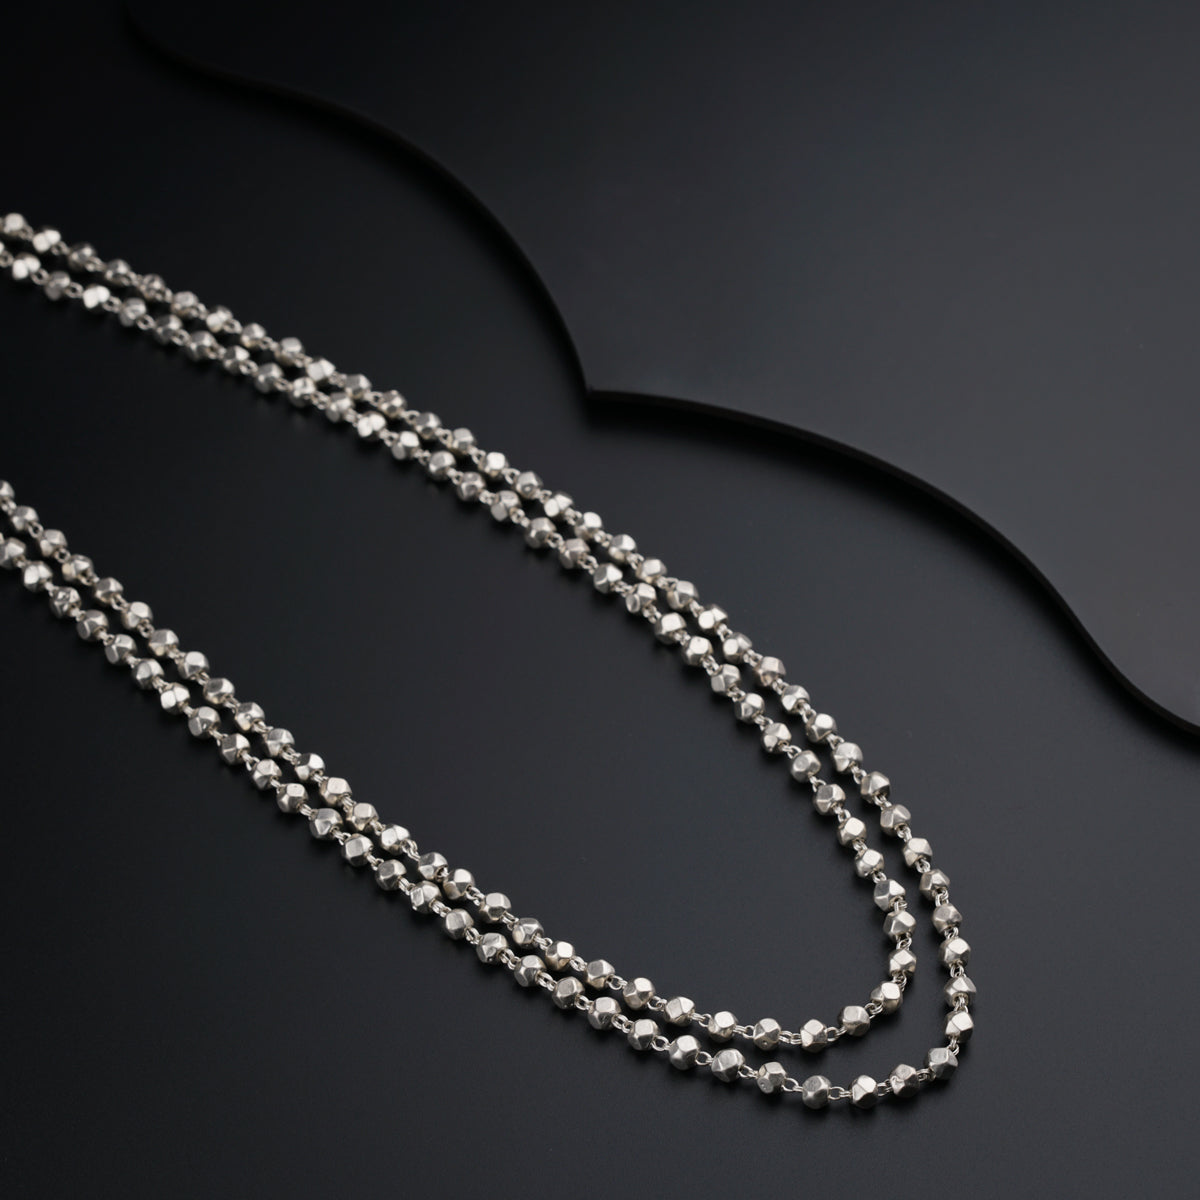 a silver chain with a diamond clasp on a black surface